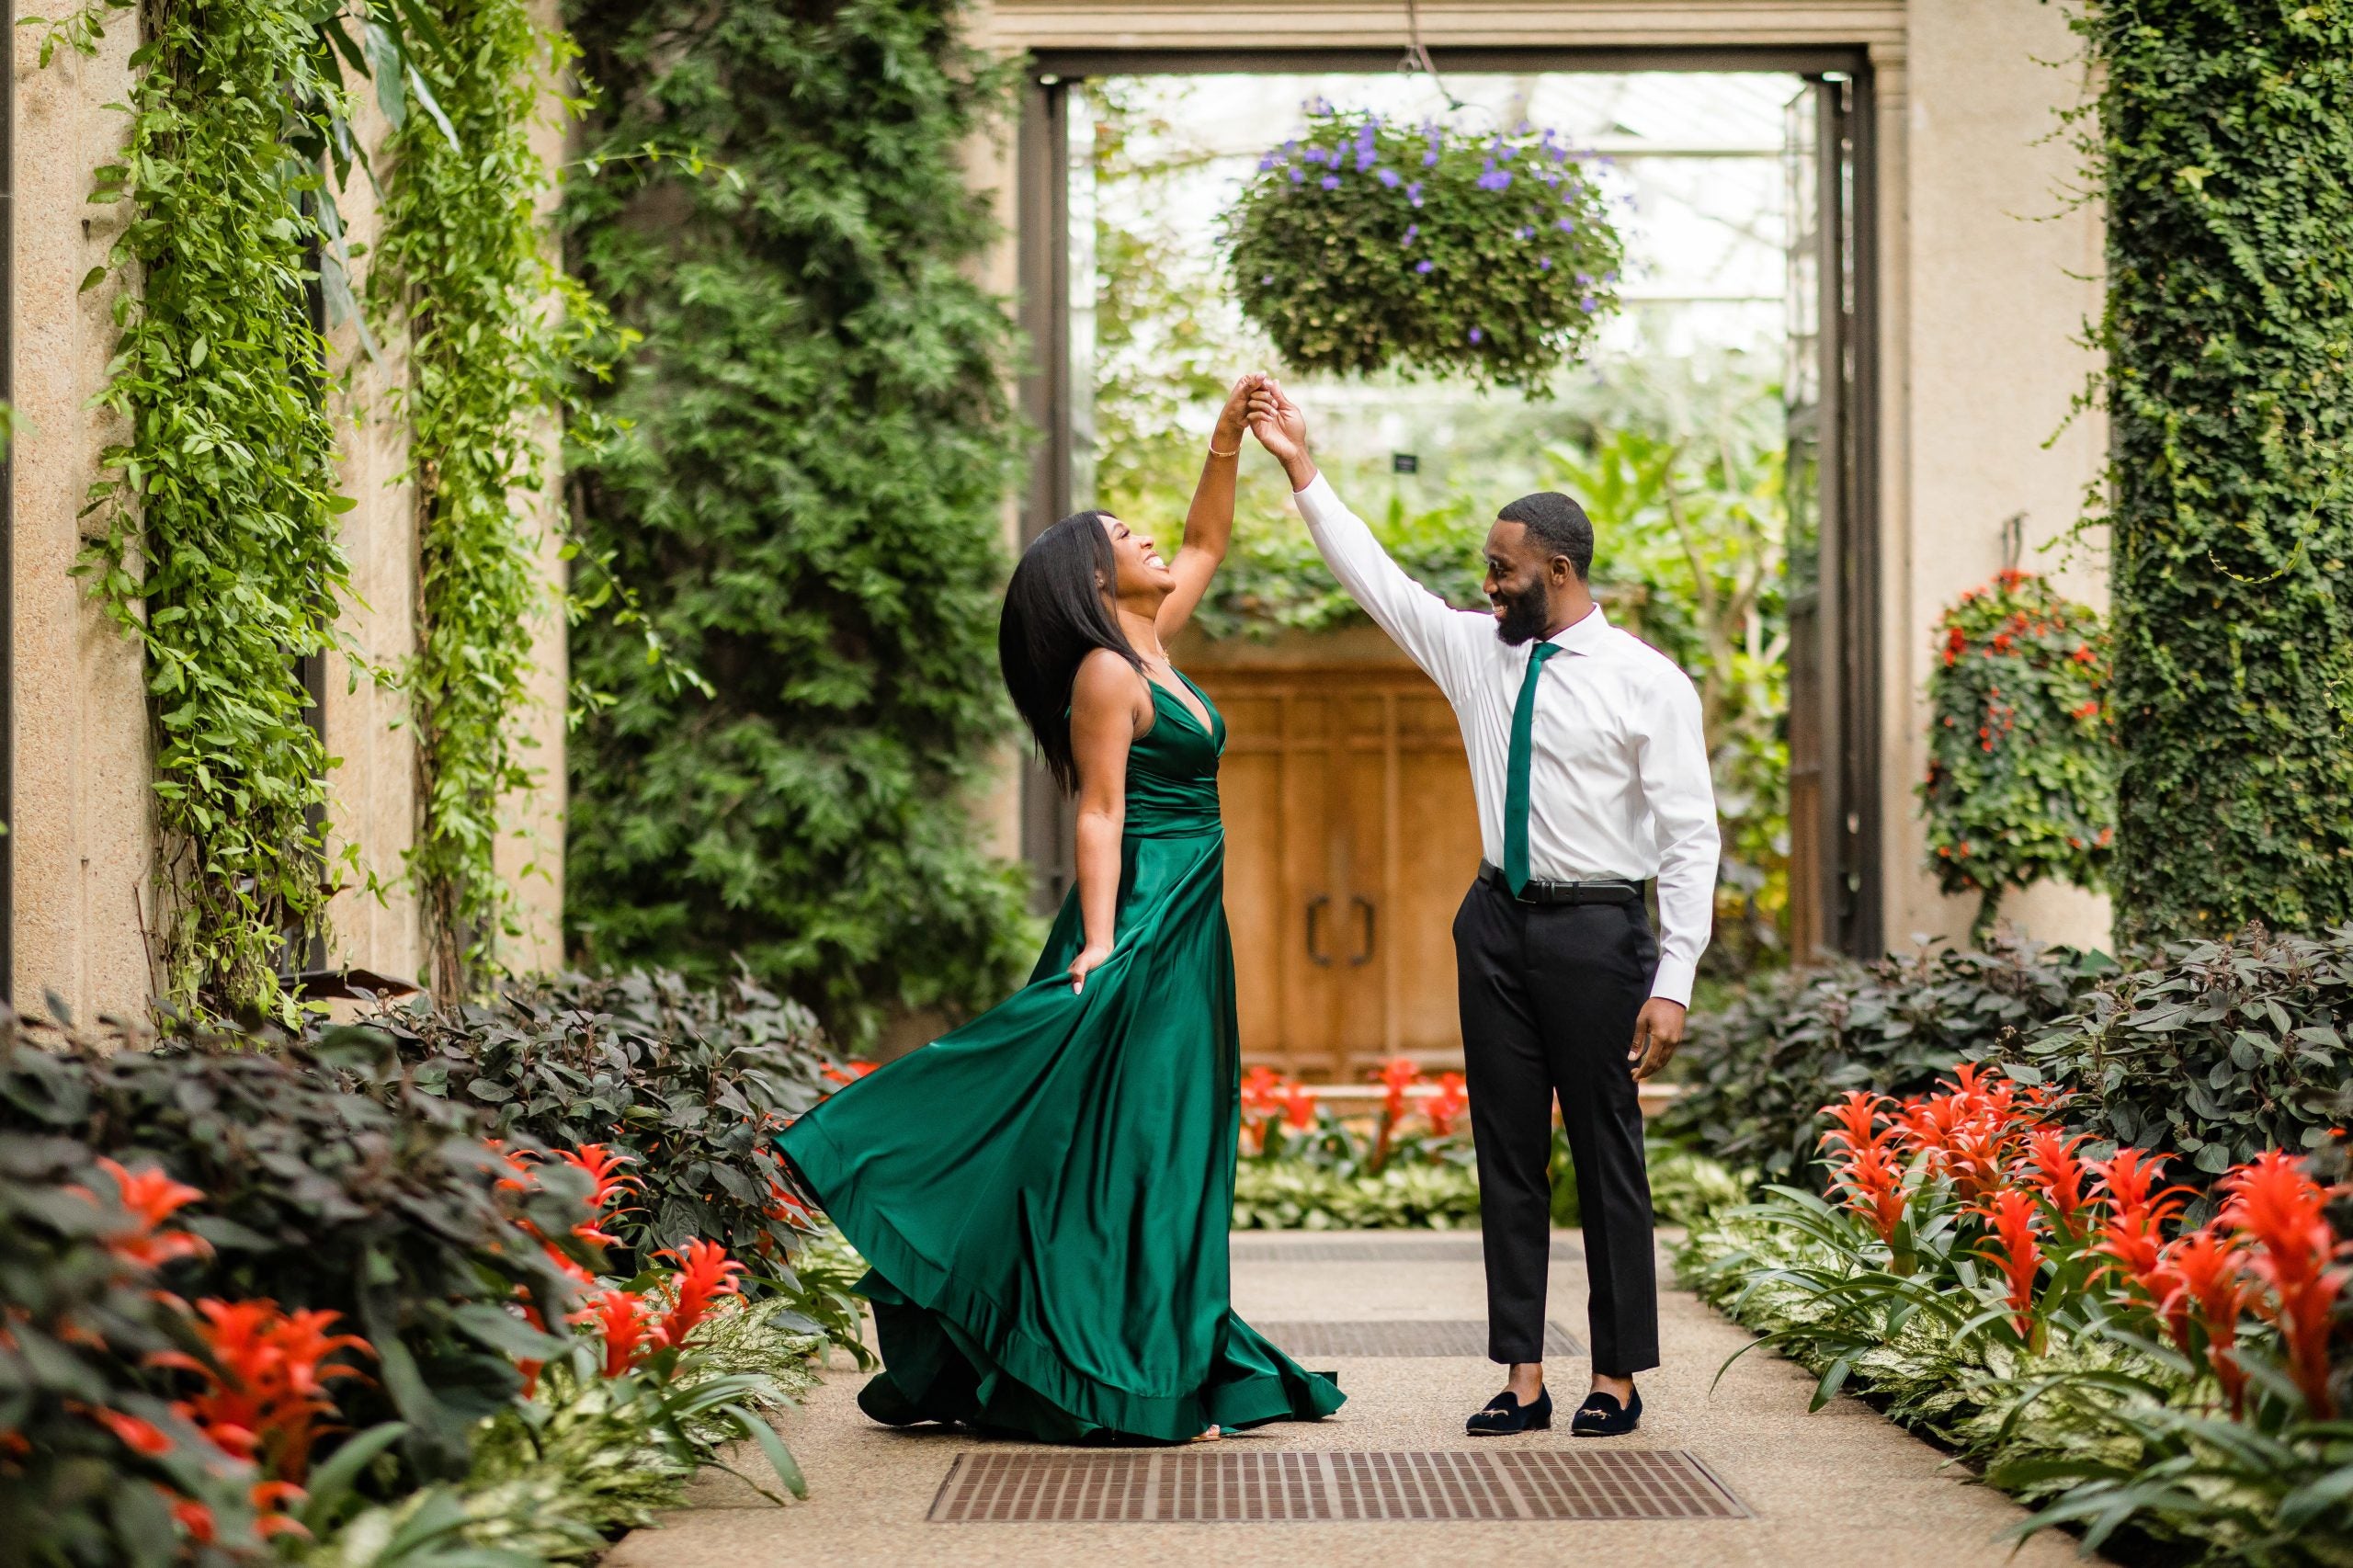 Old, New, Borrowed, Blue: This Couple's Epic Engagement Shoot Included Four Fabulous Outfit Changes